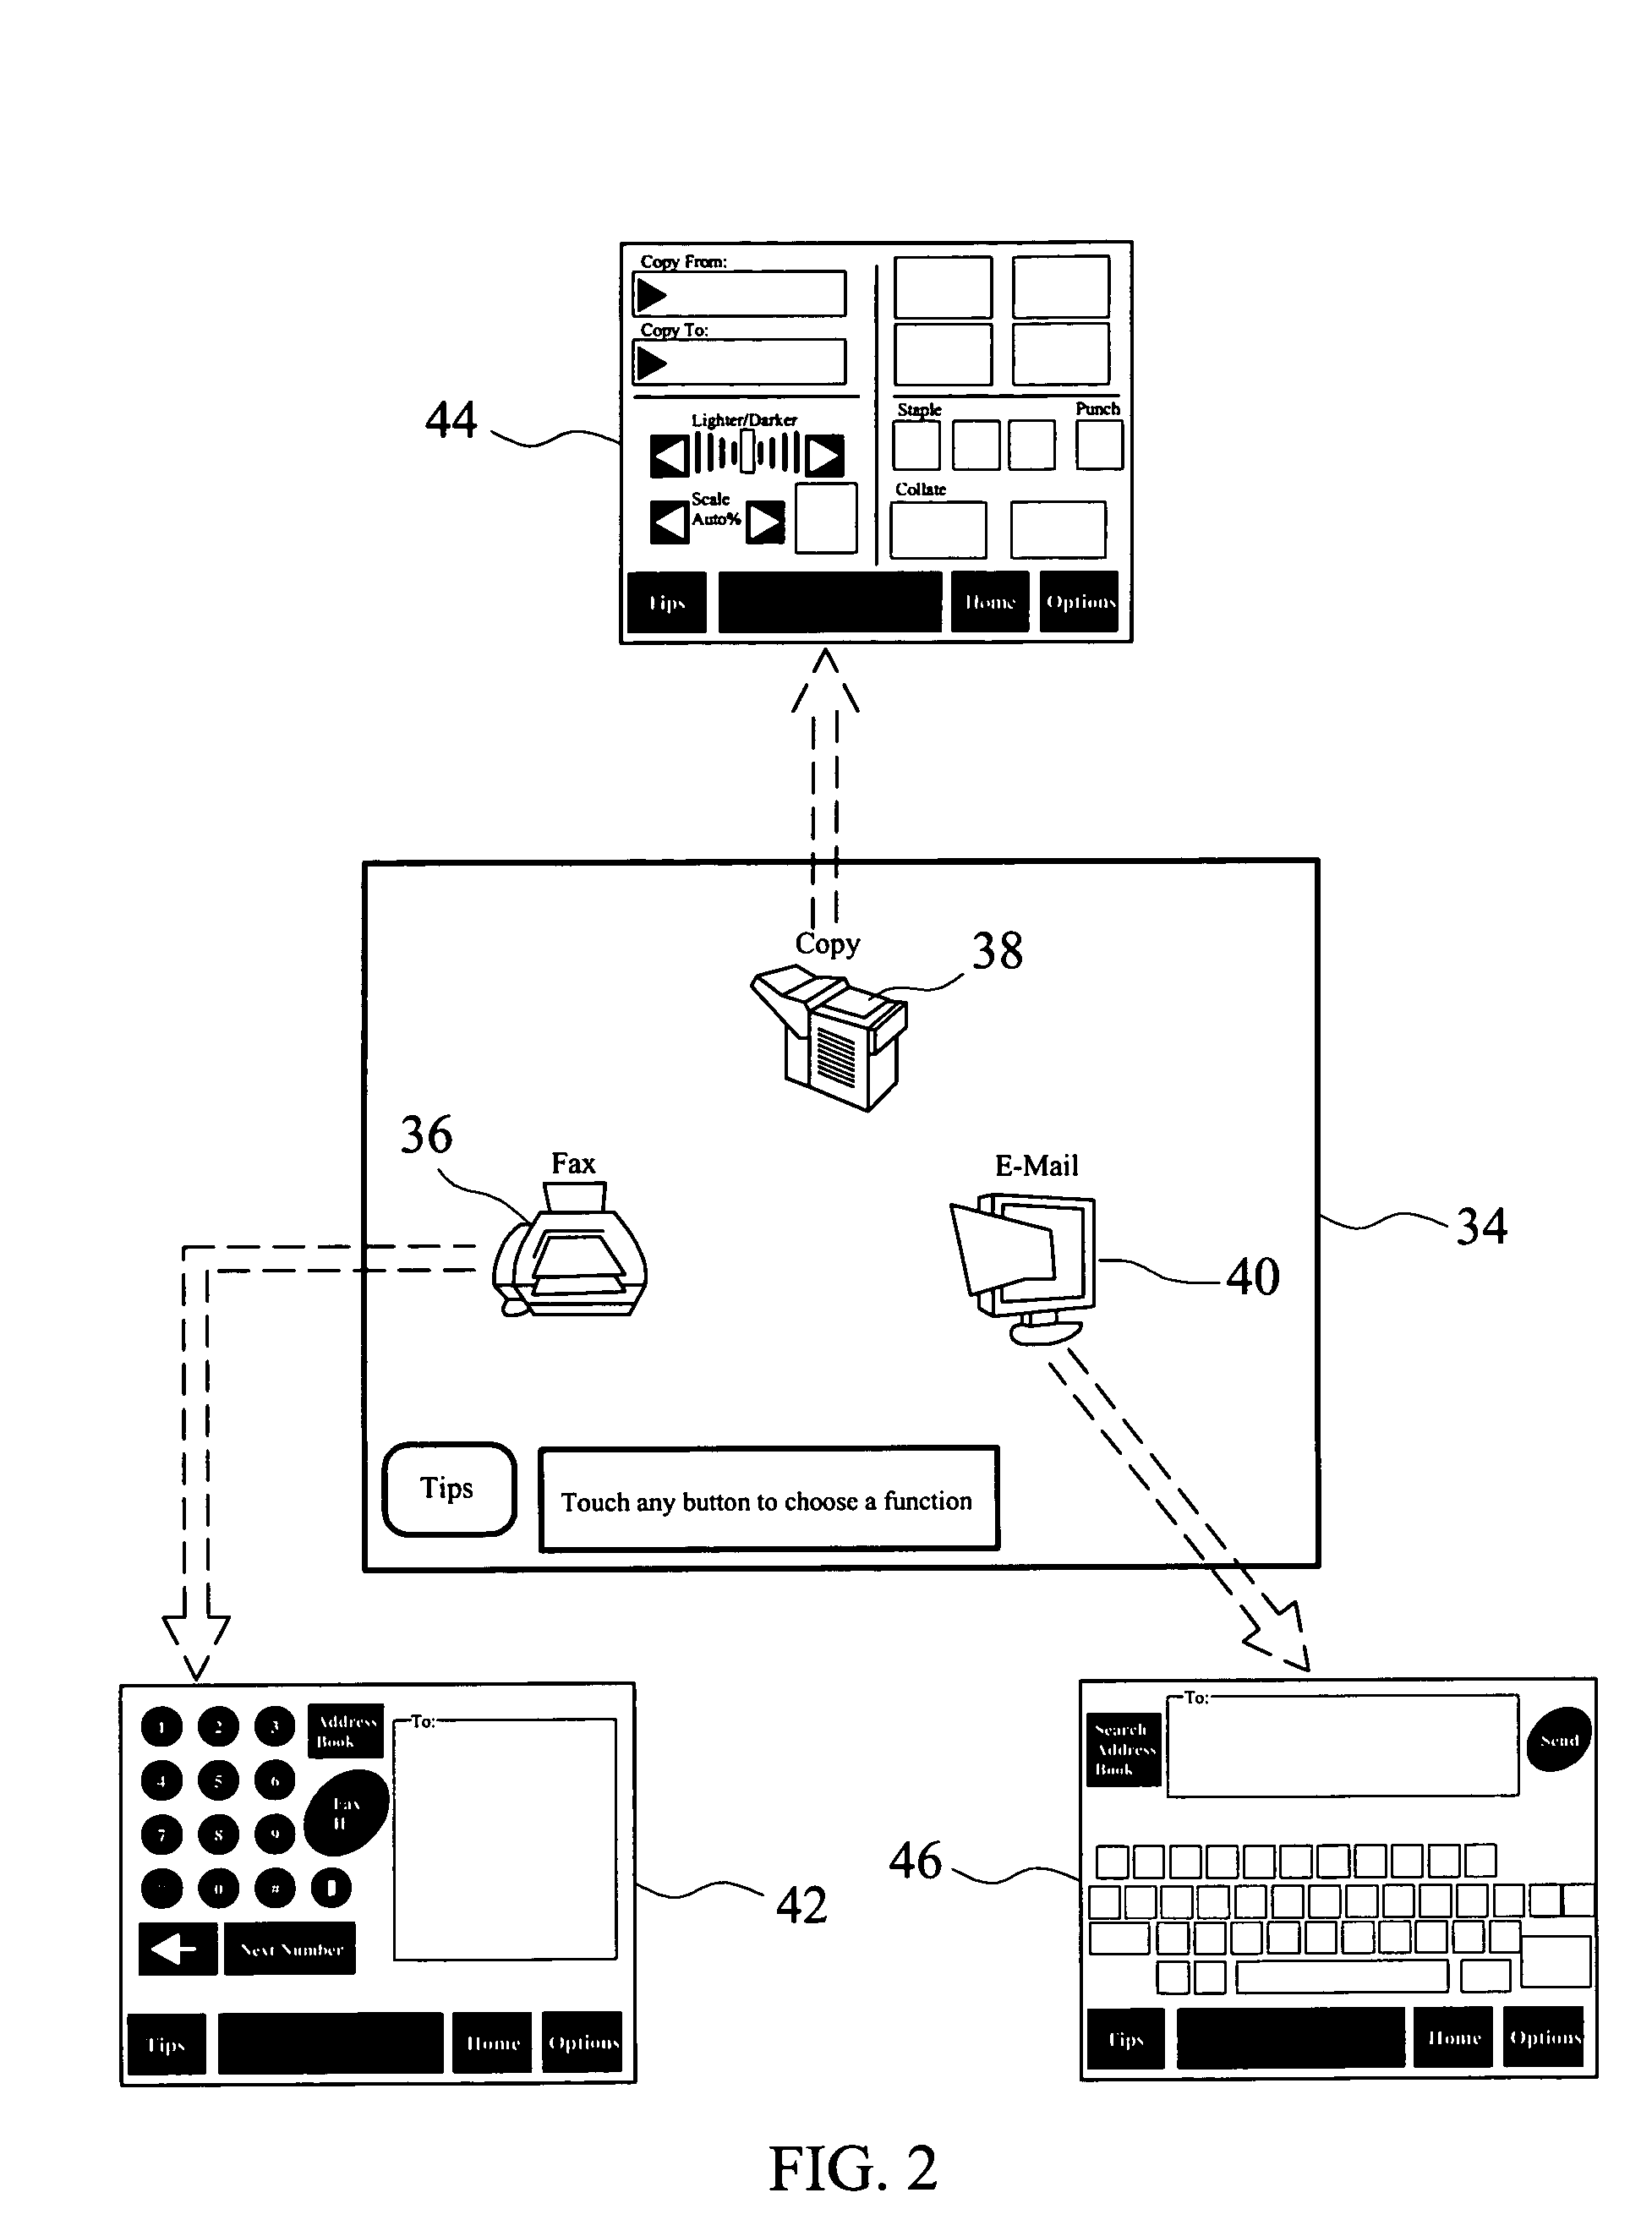 Multi-function device having graphical user interface incorporating customizable icons